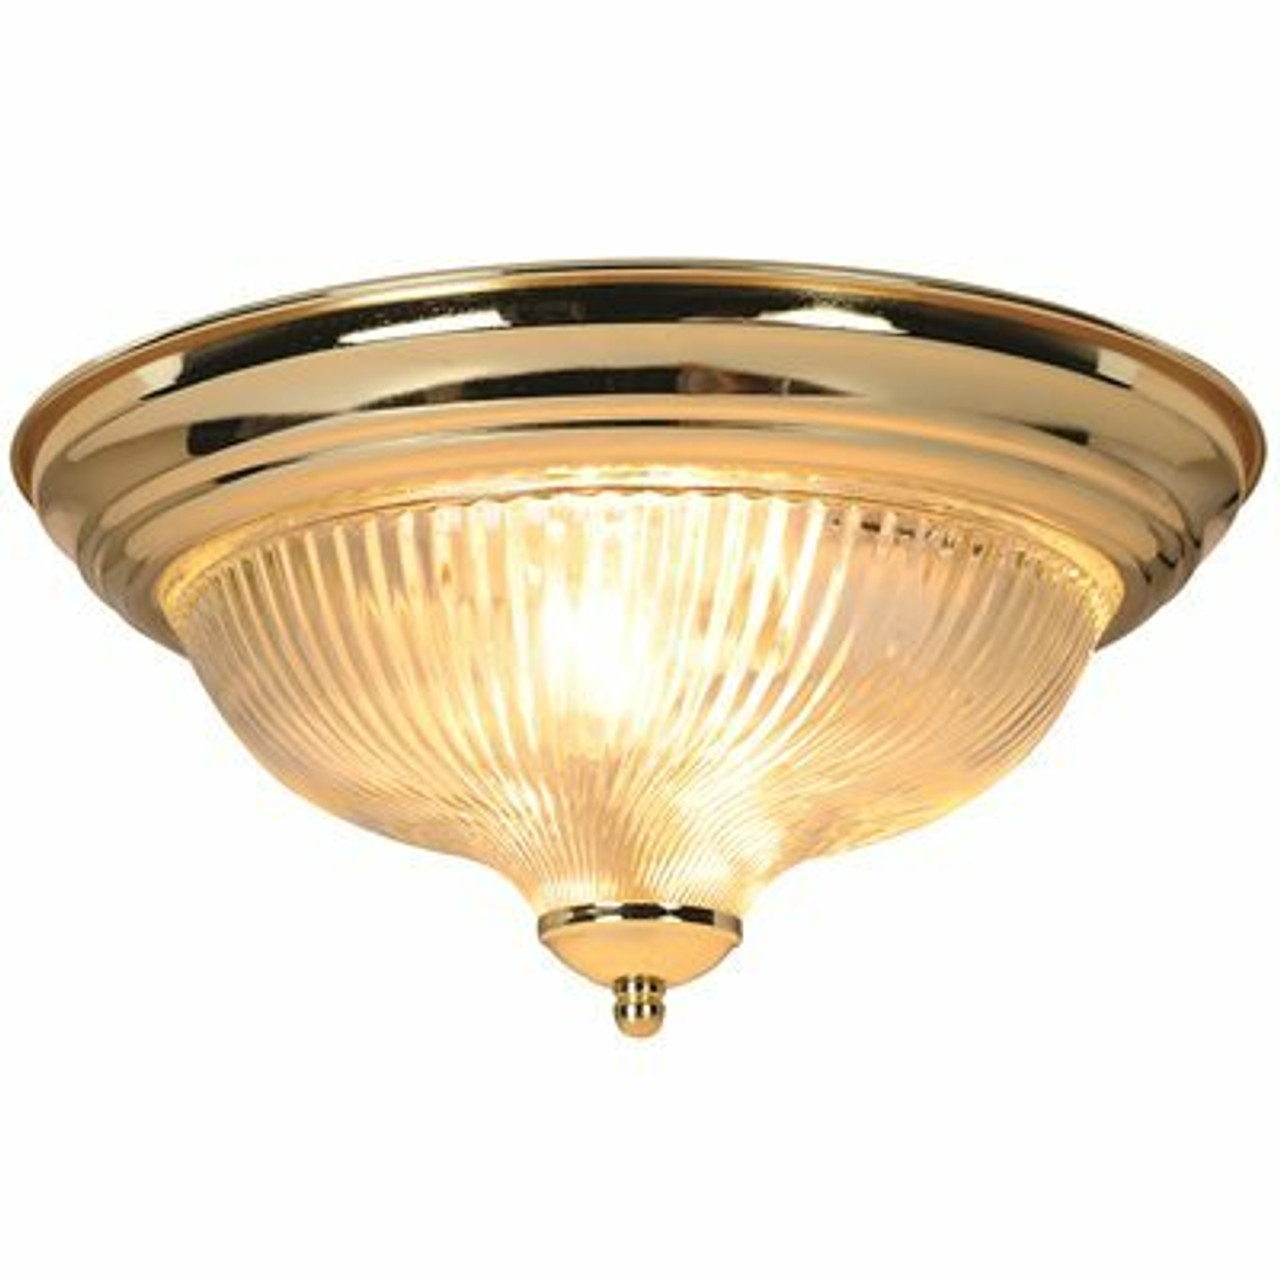 Monument 12-3/4 In. Surface Mount Ceiling In Fixture Polished Brass Uses Two 75-Watt Incandescent Medium Base Lamps